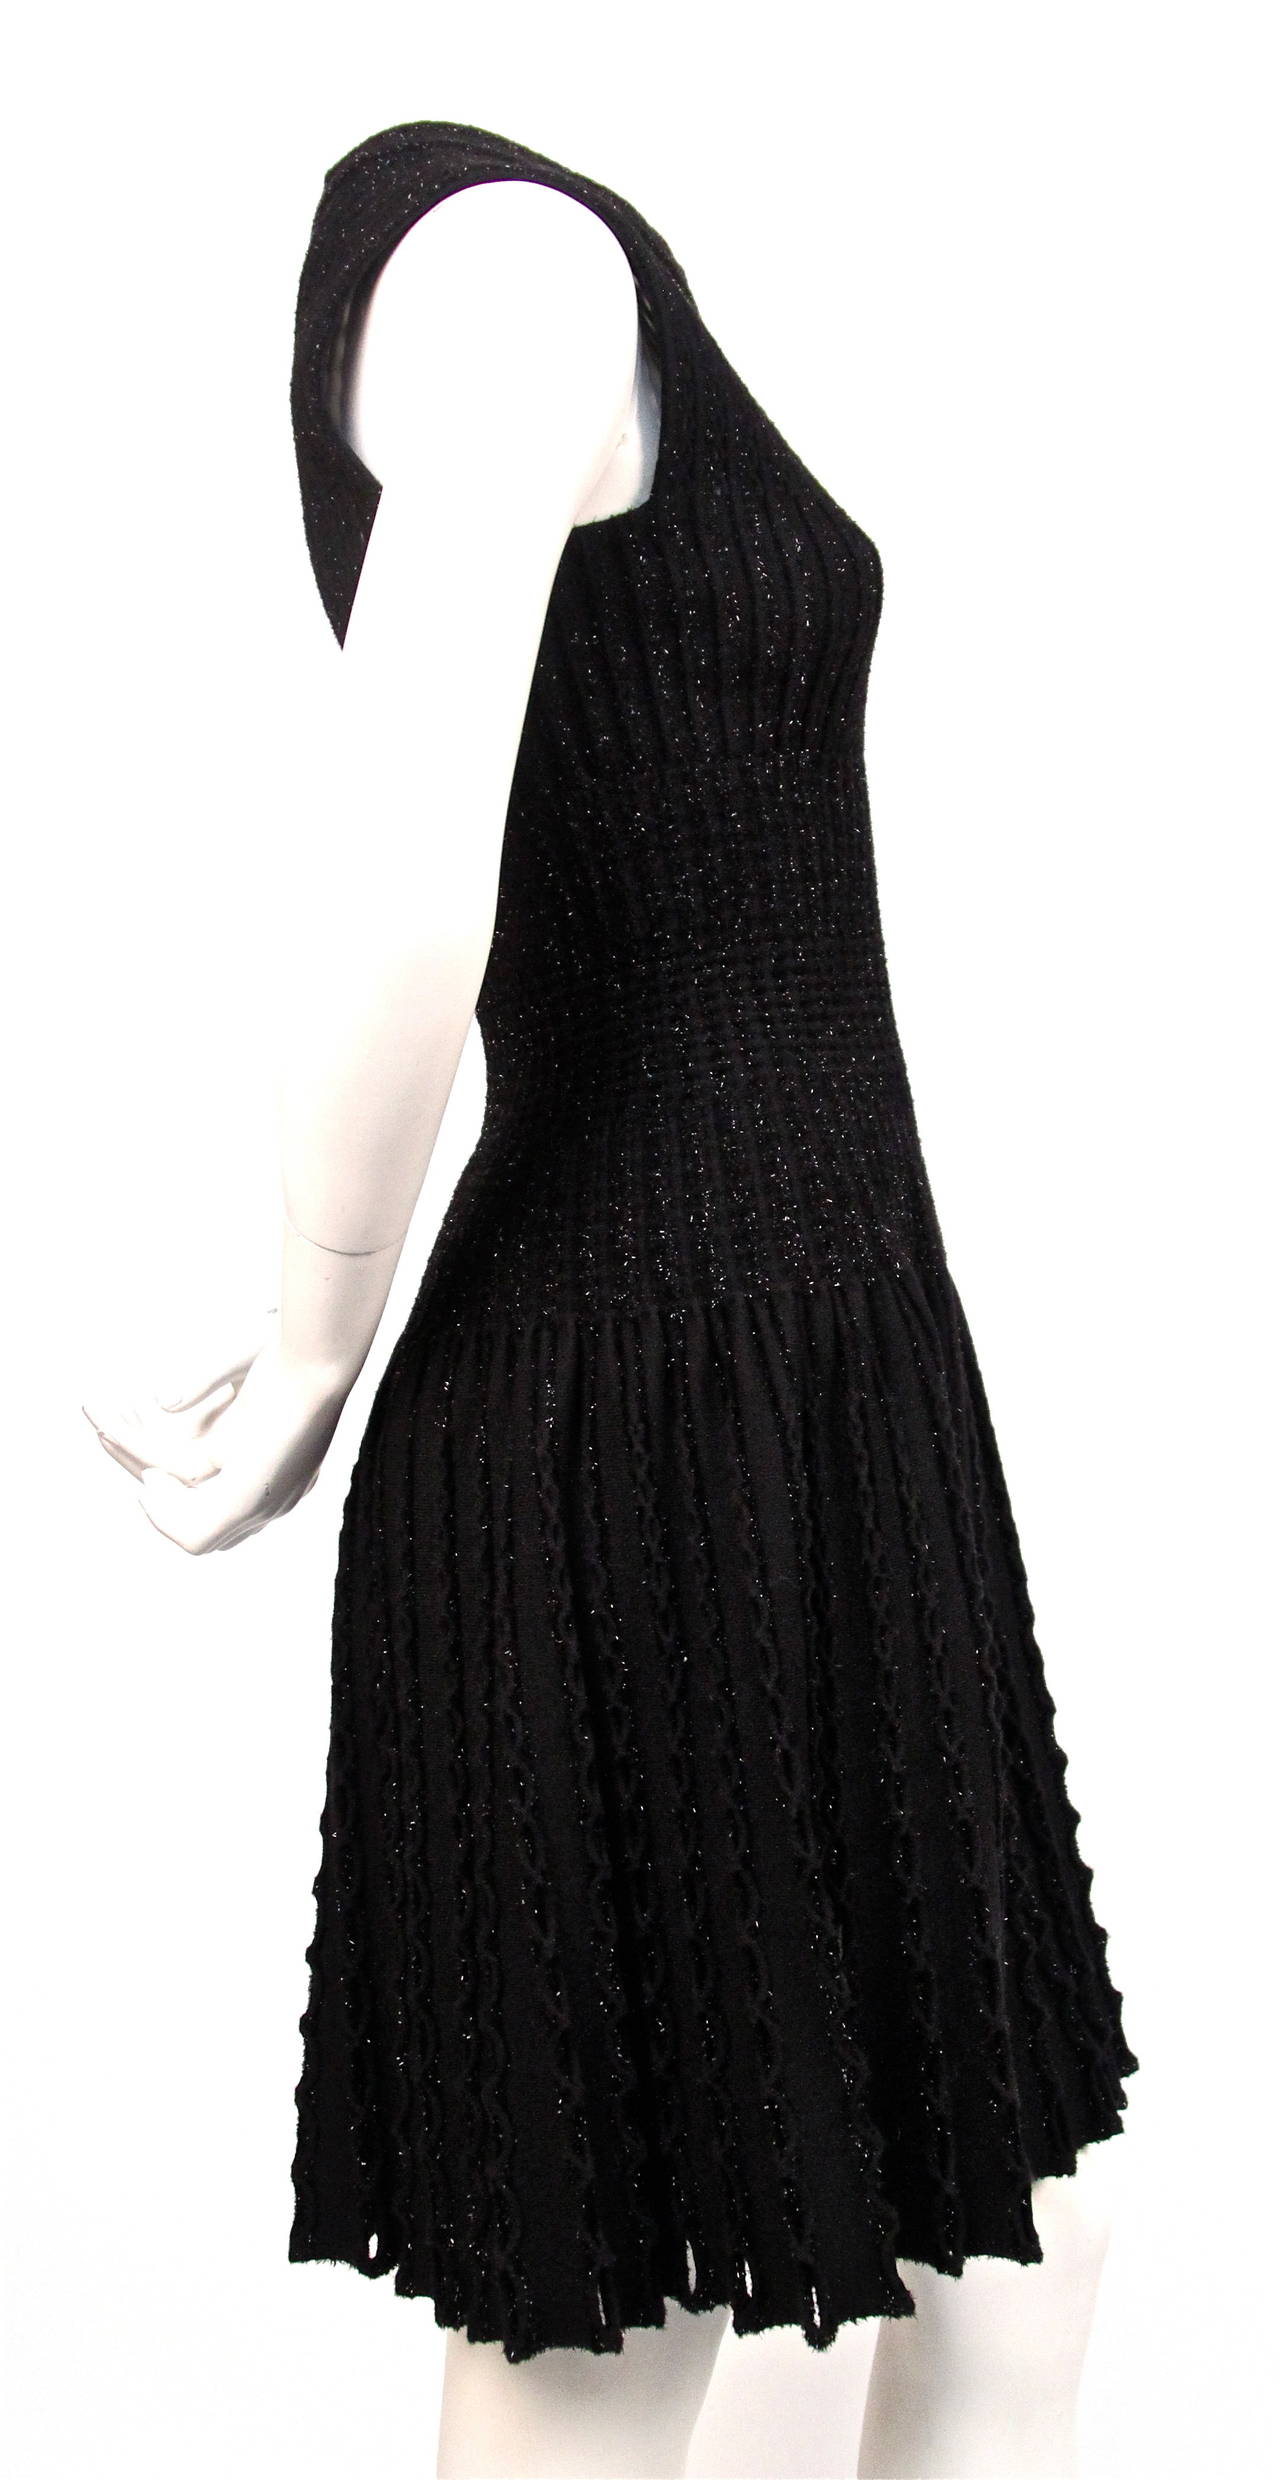 Jet black lurex knit dress with cut outs from Azzedine Alaia from a recent collection. French size 38. Approximate measurements: bust 30